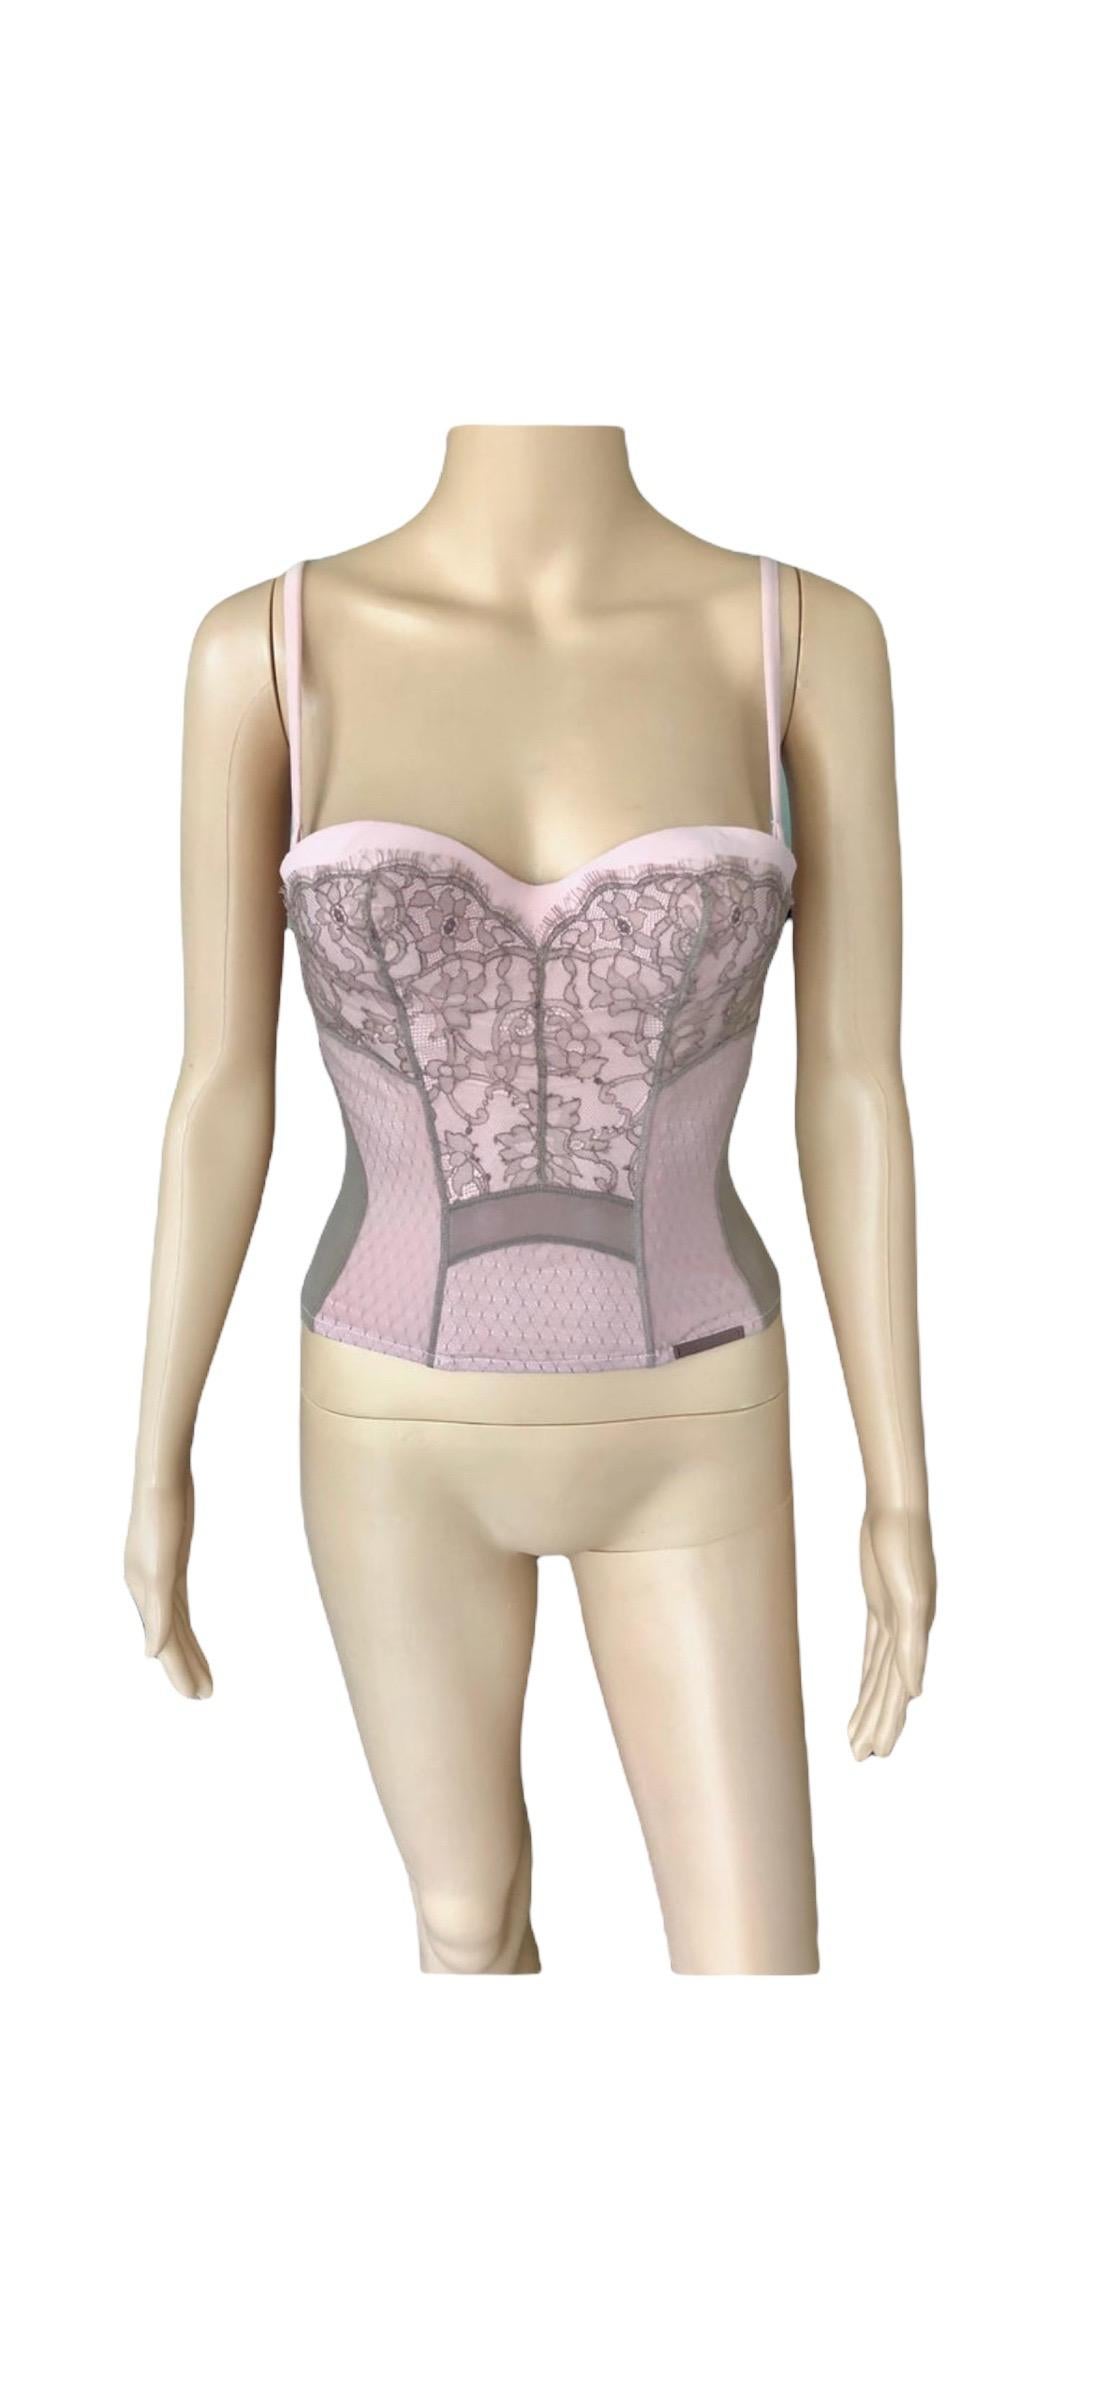 Christian Dior By John Galliano S/S 2006 Unworn Bustier Lace Corset Crop Top For Sale 3